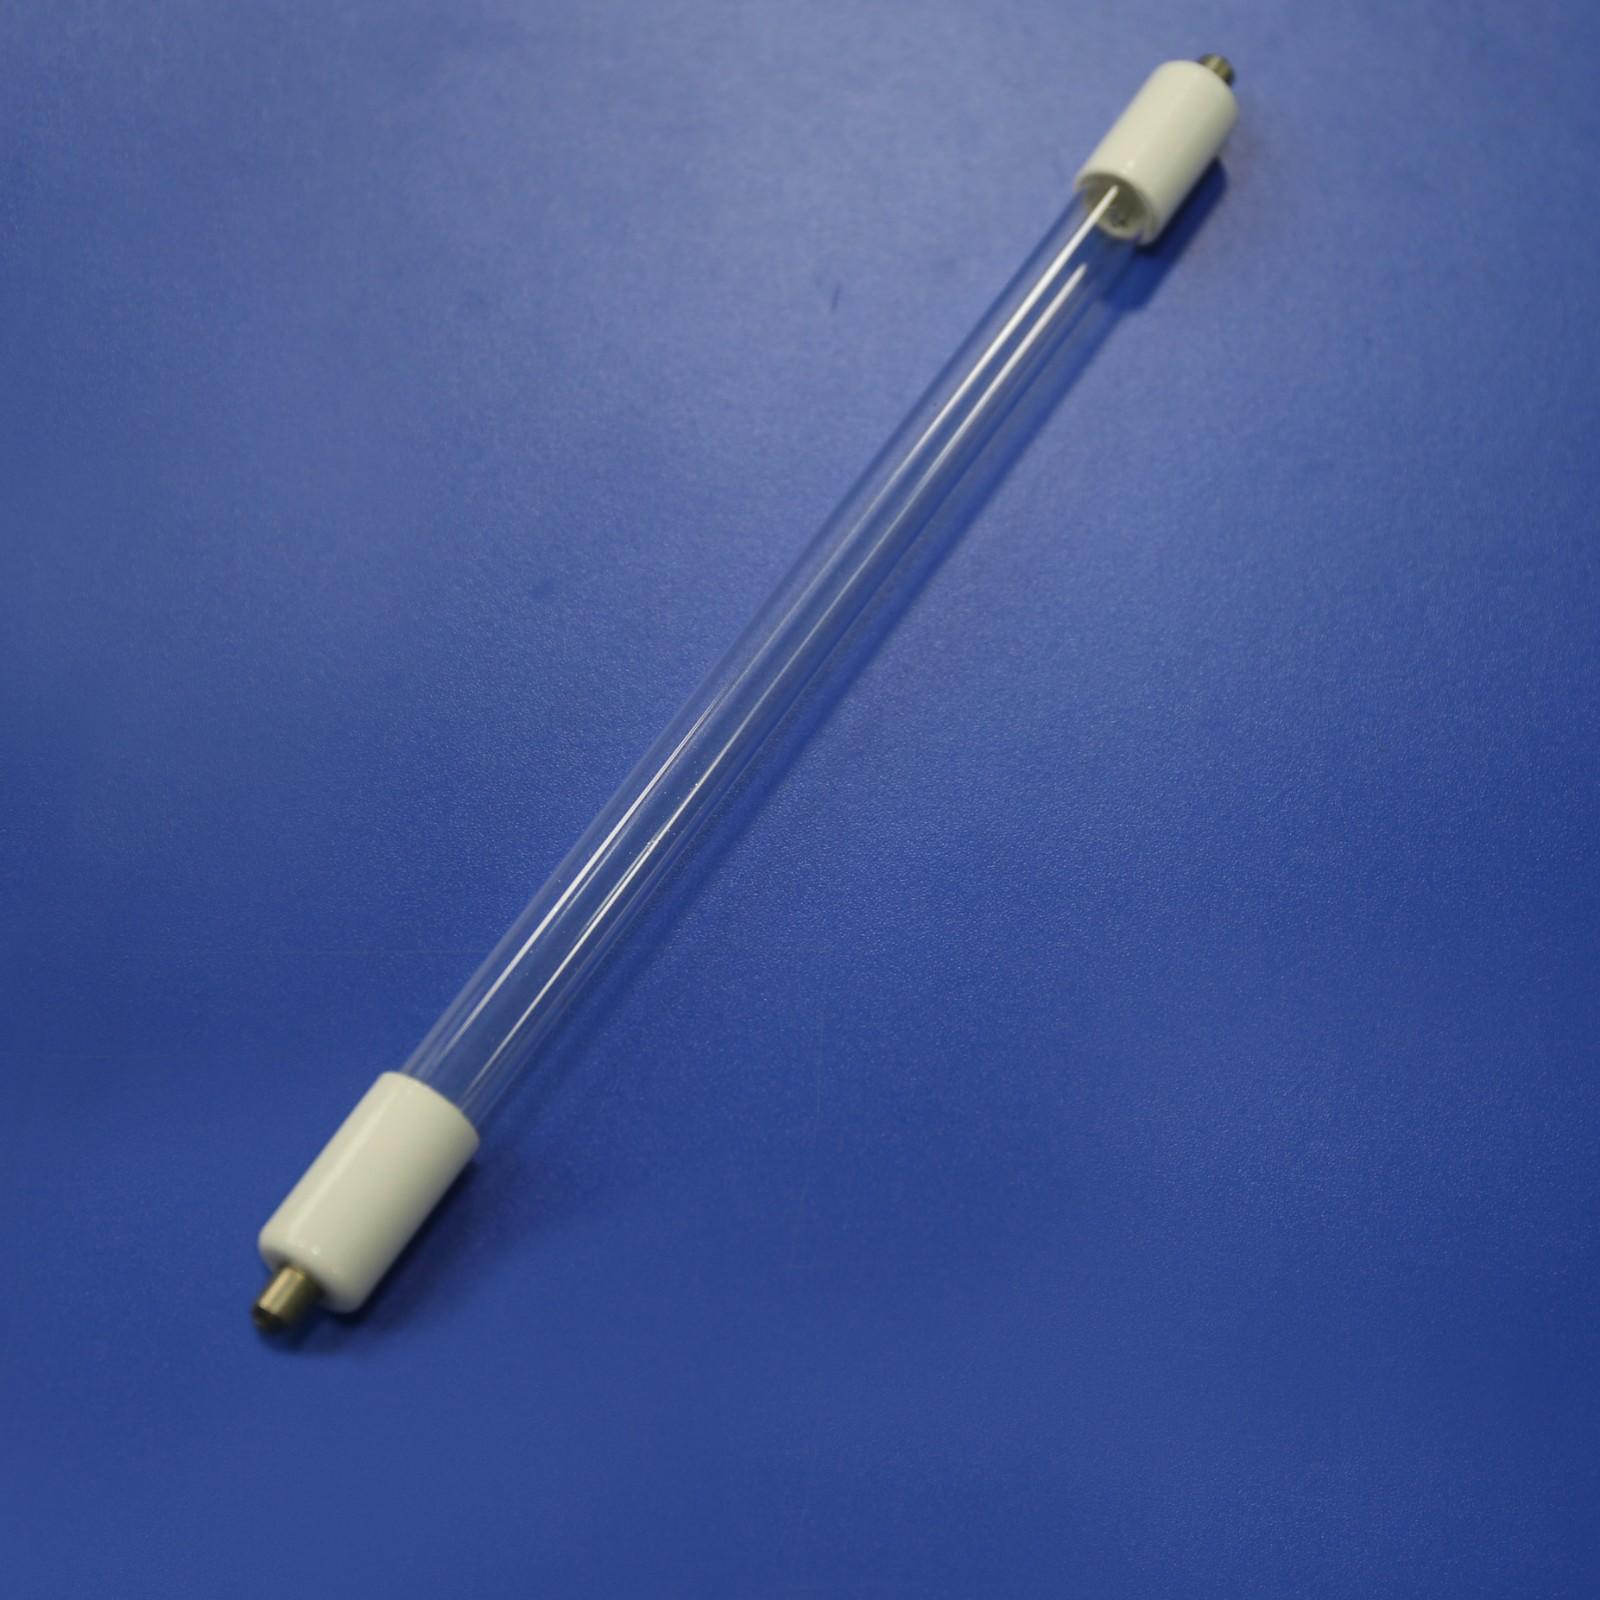 highly recommend ultraviolet germicidal lamp pin tube for wastewater plant-1